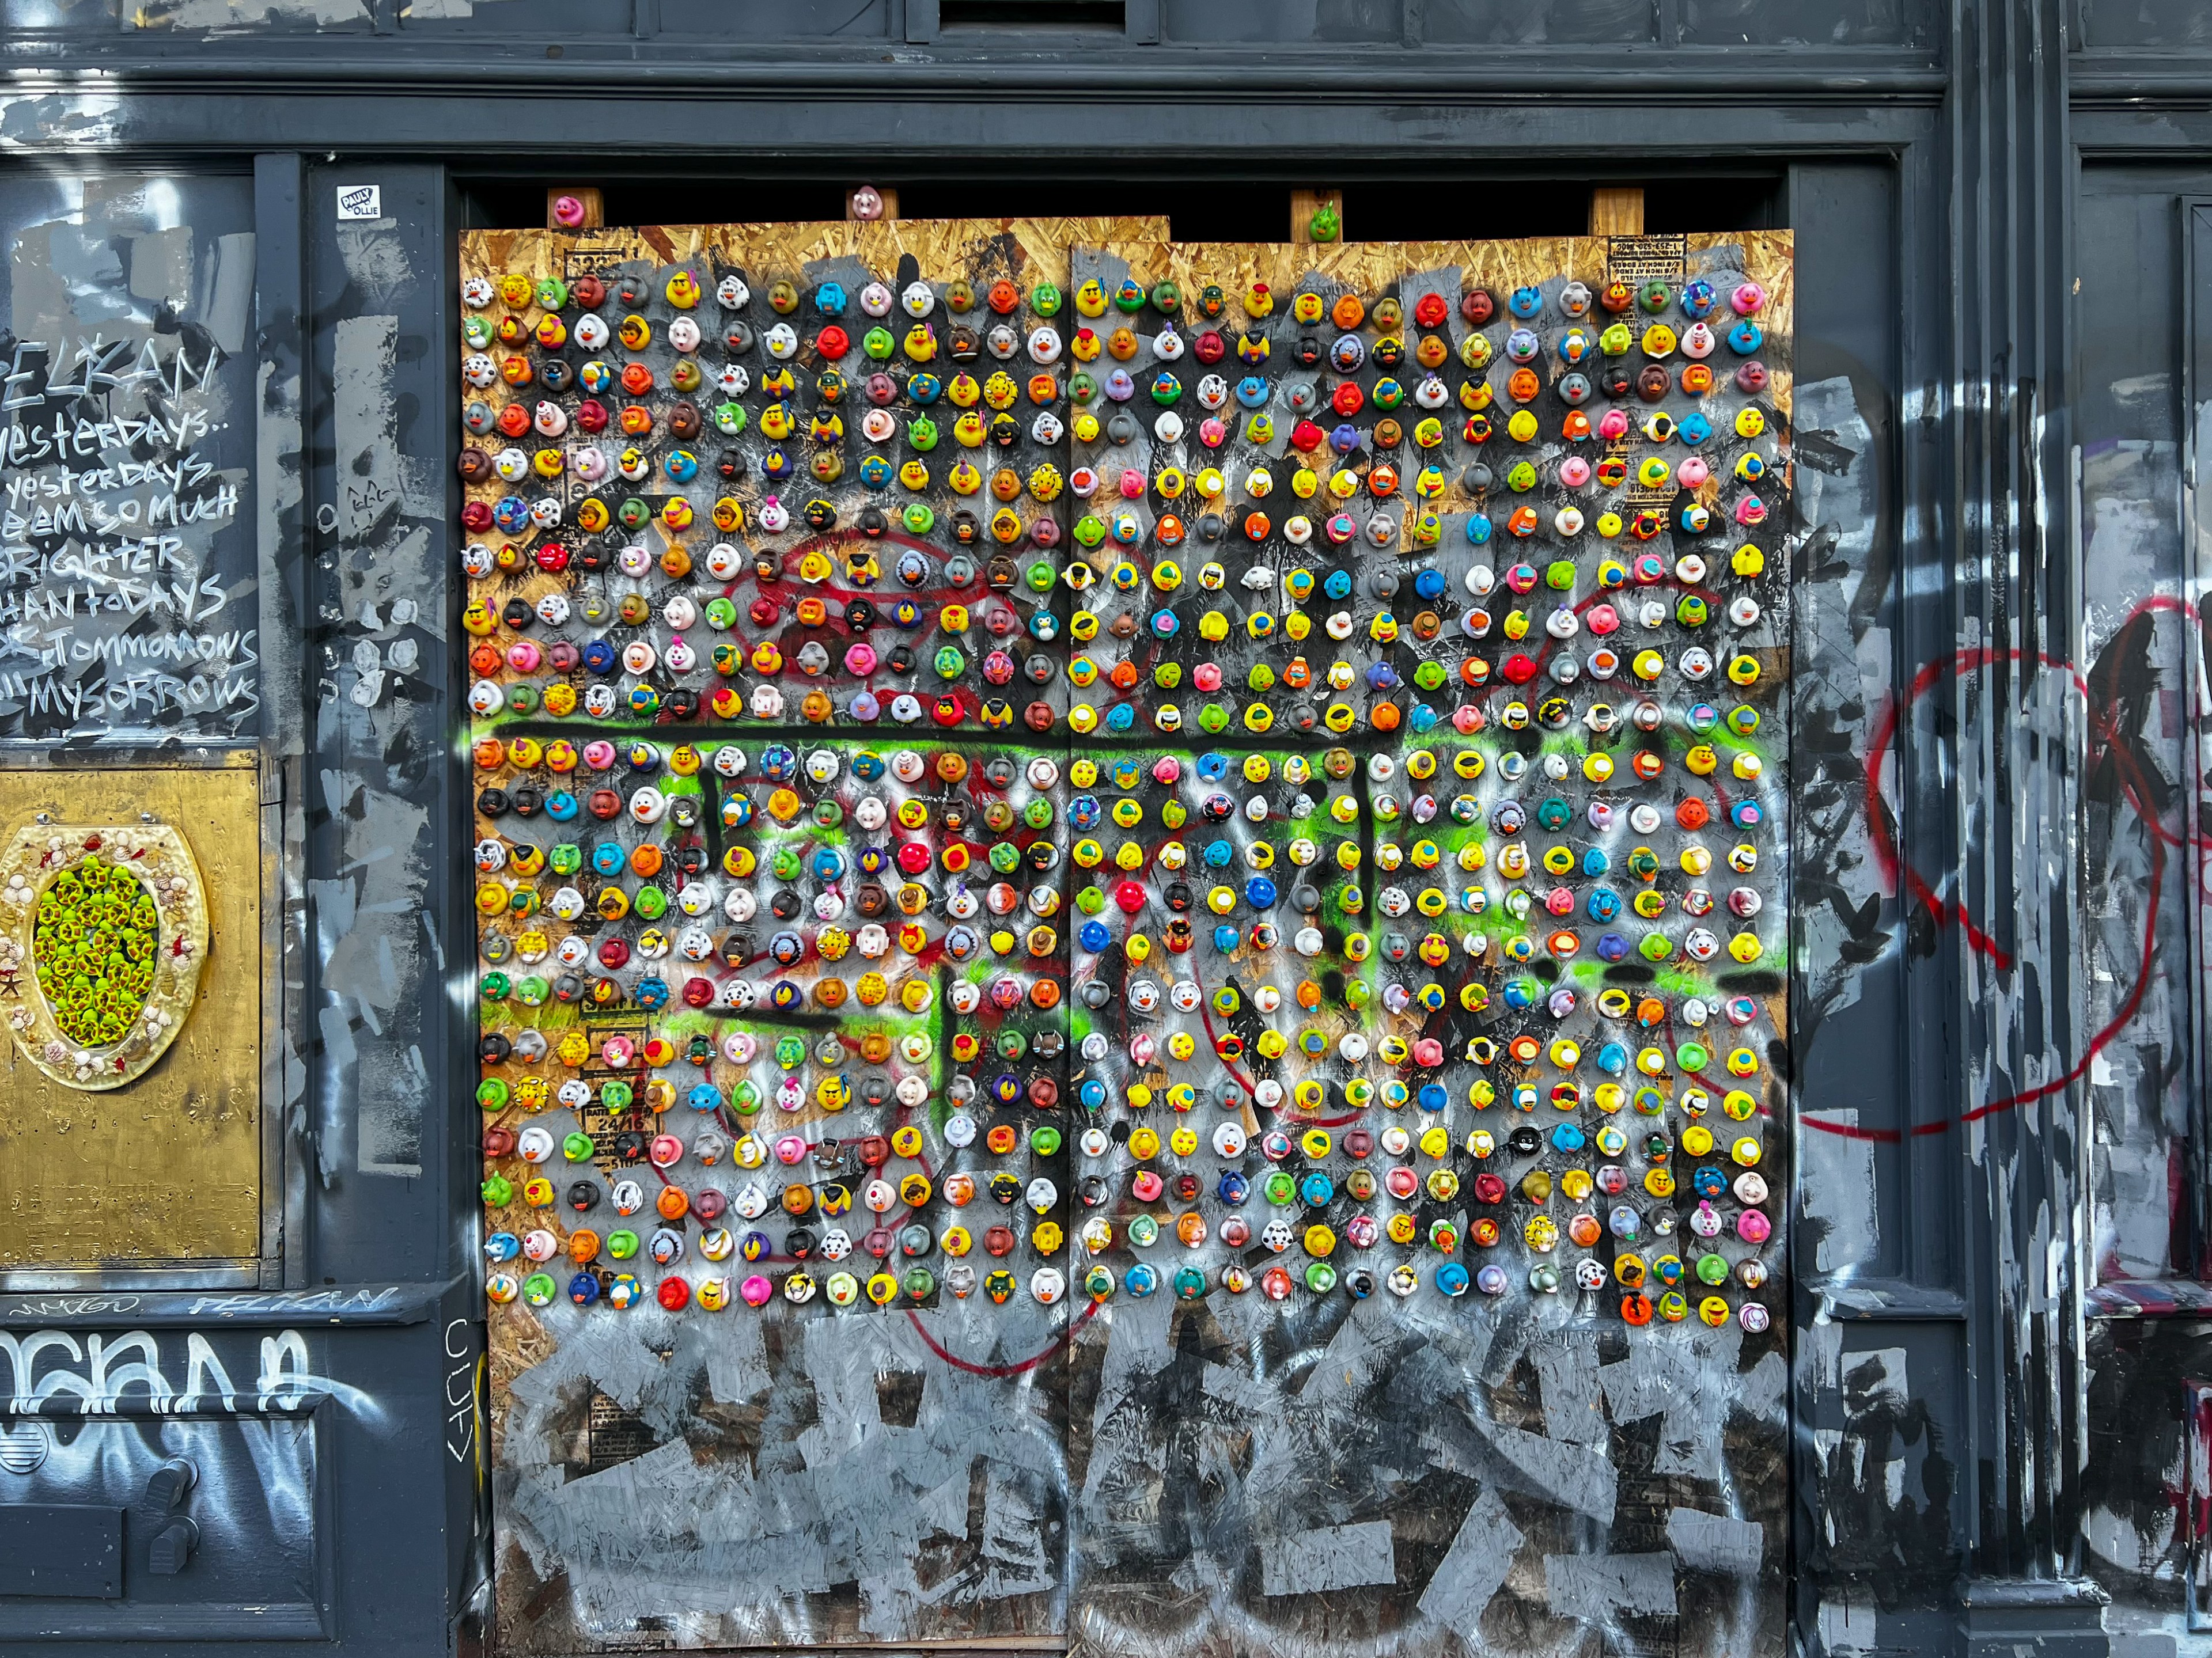 an art piece consisting of 663 mounted rubber ducks on a wall facing a city sidewalk